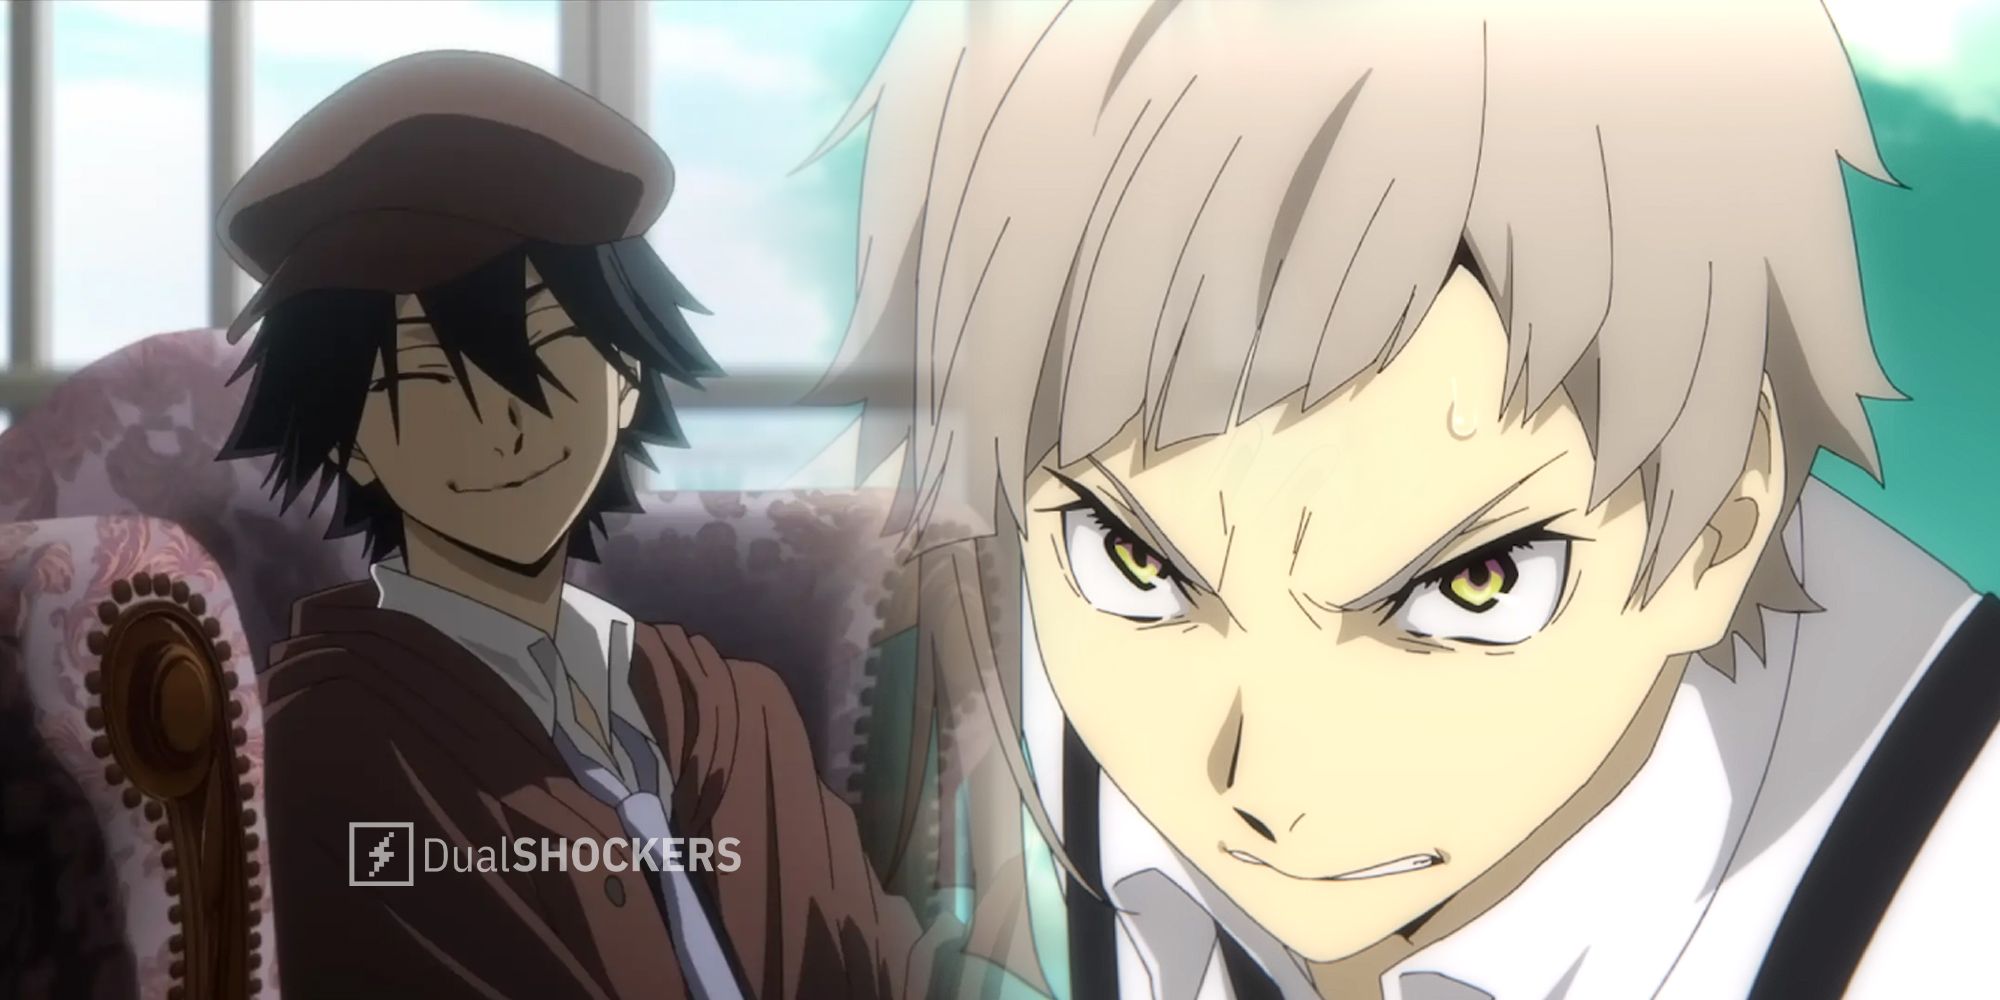 Bungo Stray Dogs Season 5 Episode 2 Release Date & Time